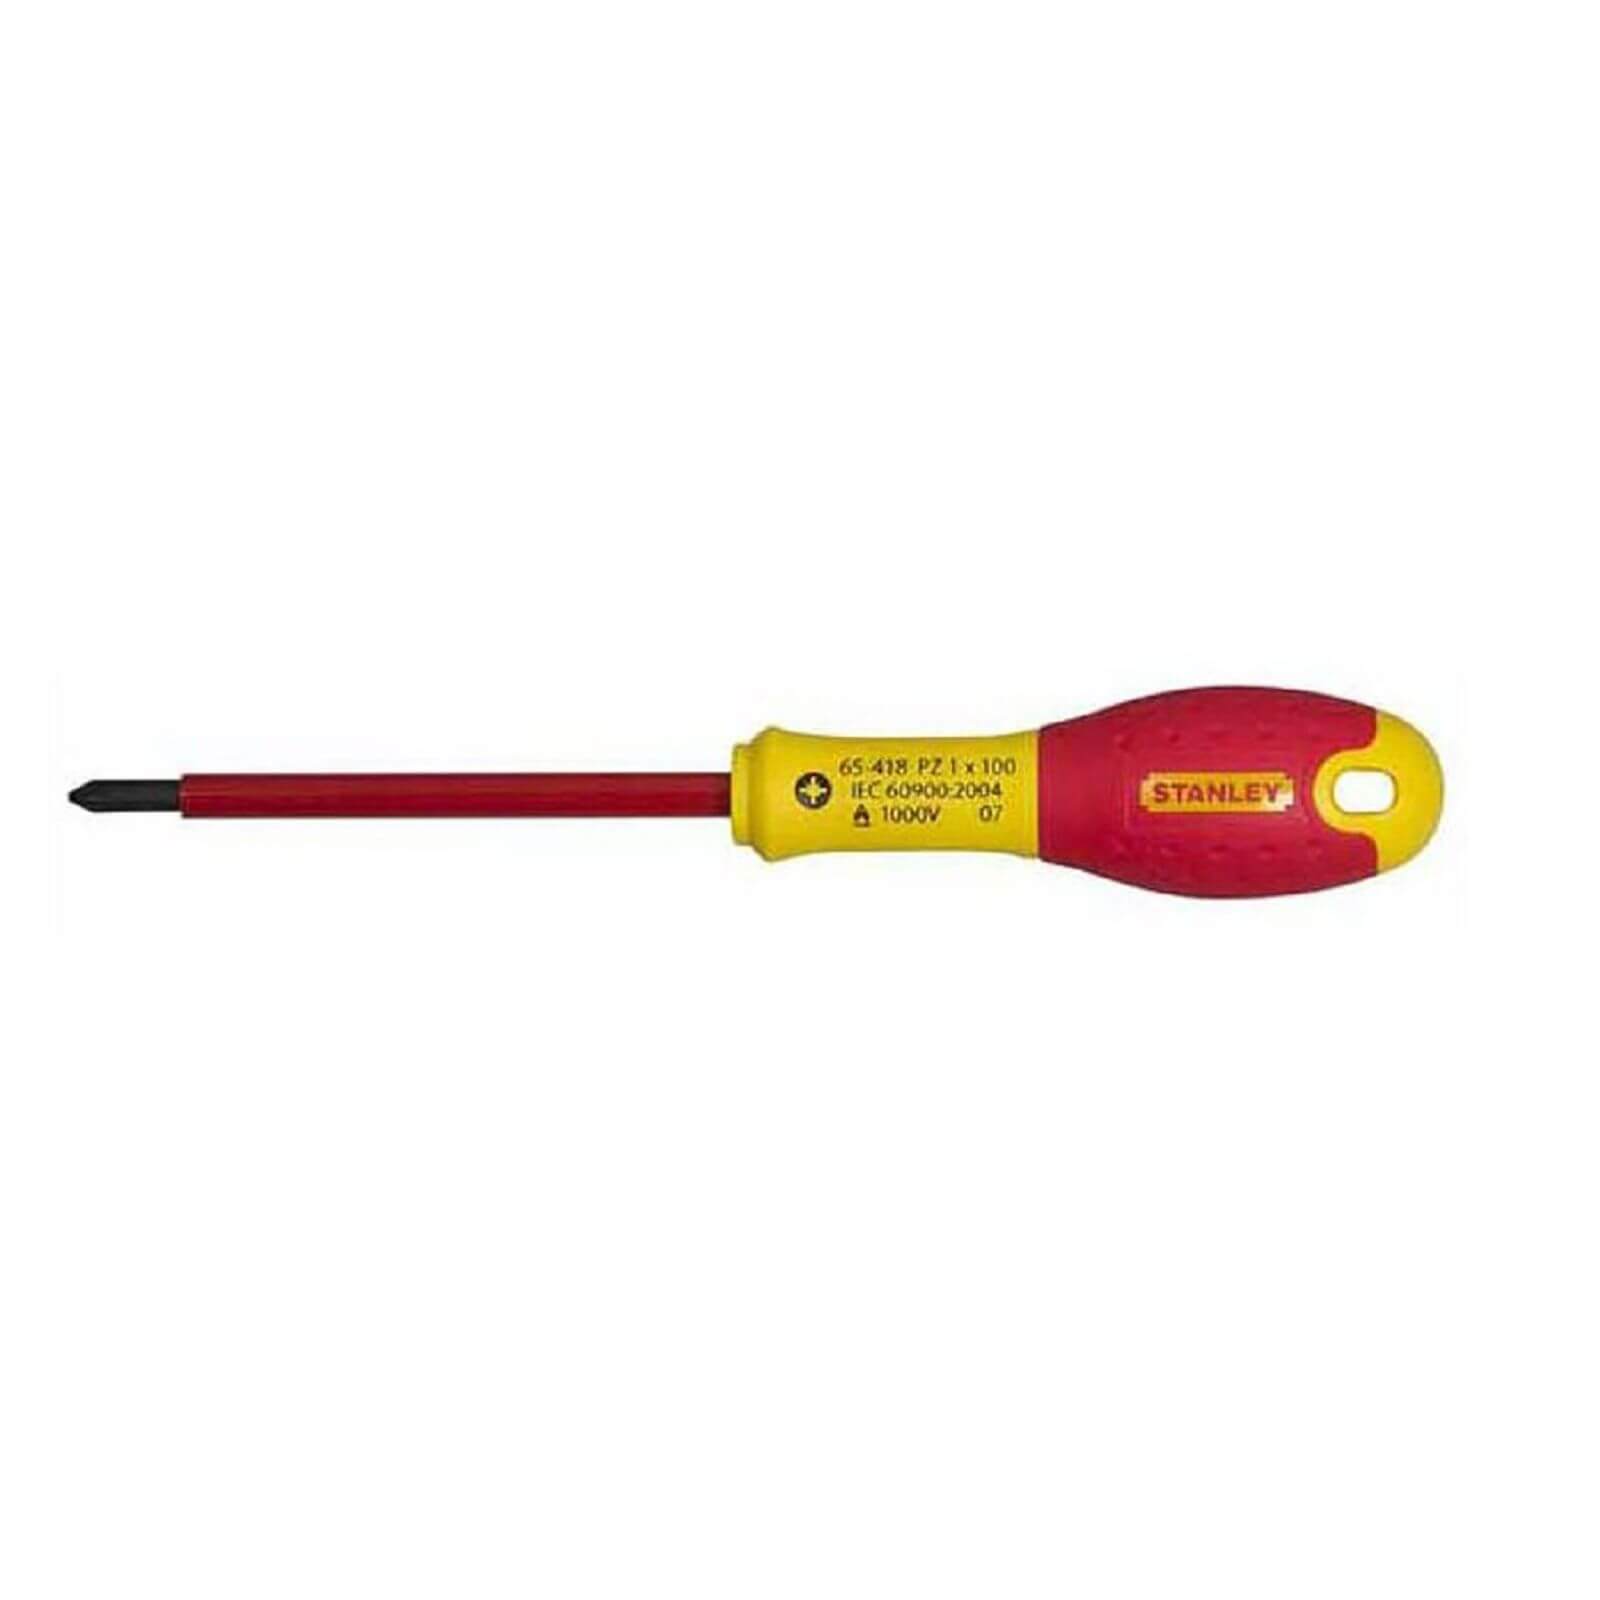 Photo of Stanley Fatmax Pozi Insulated Screwdriver - No0x75mm